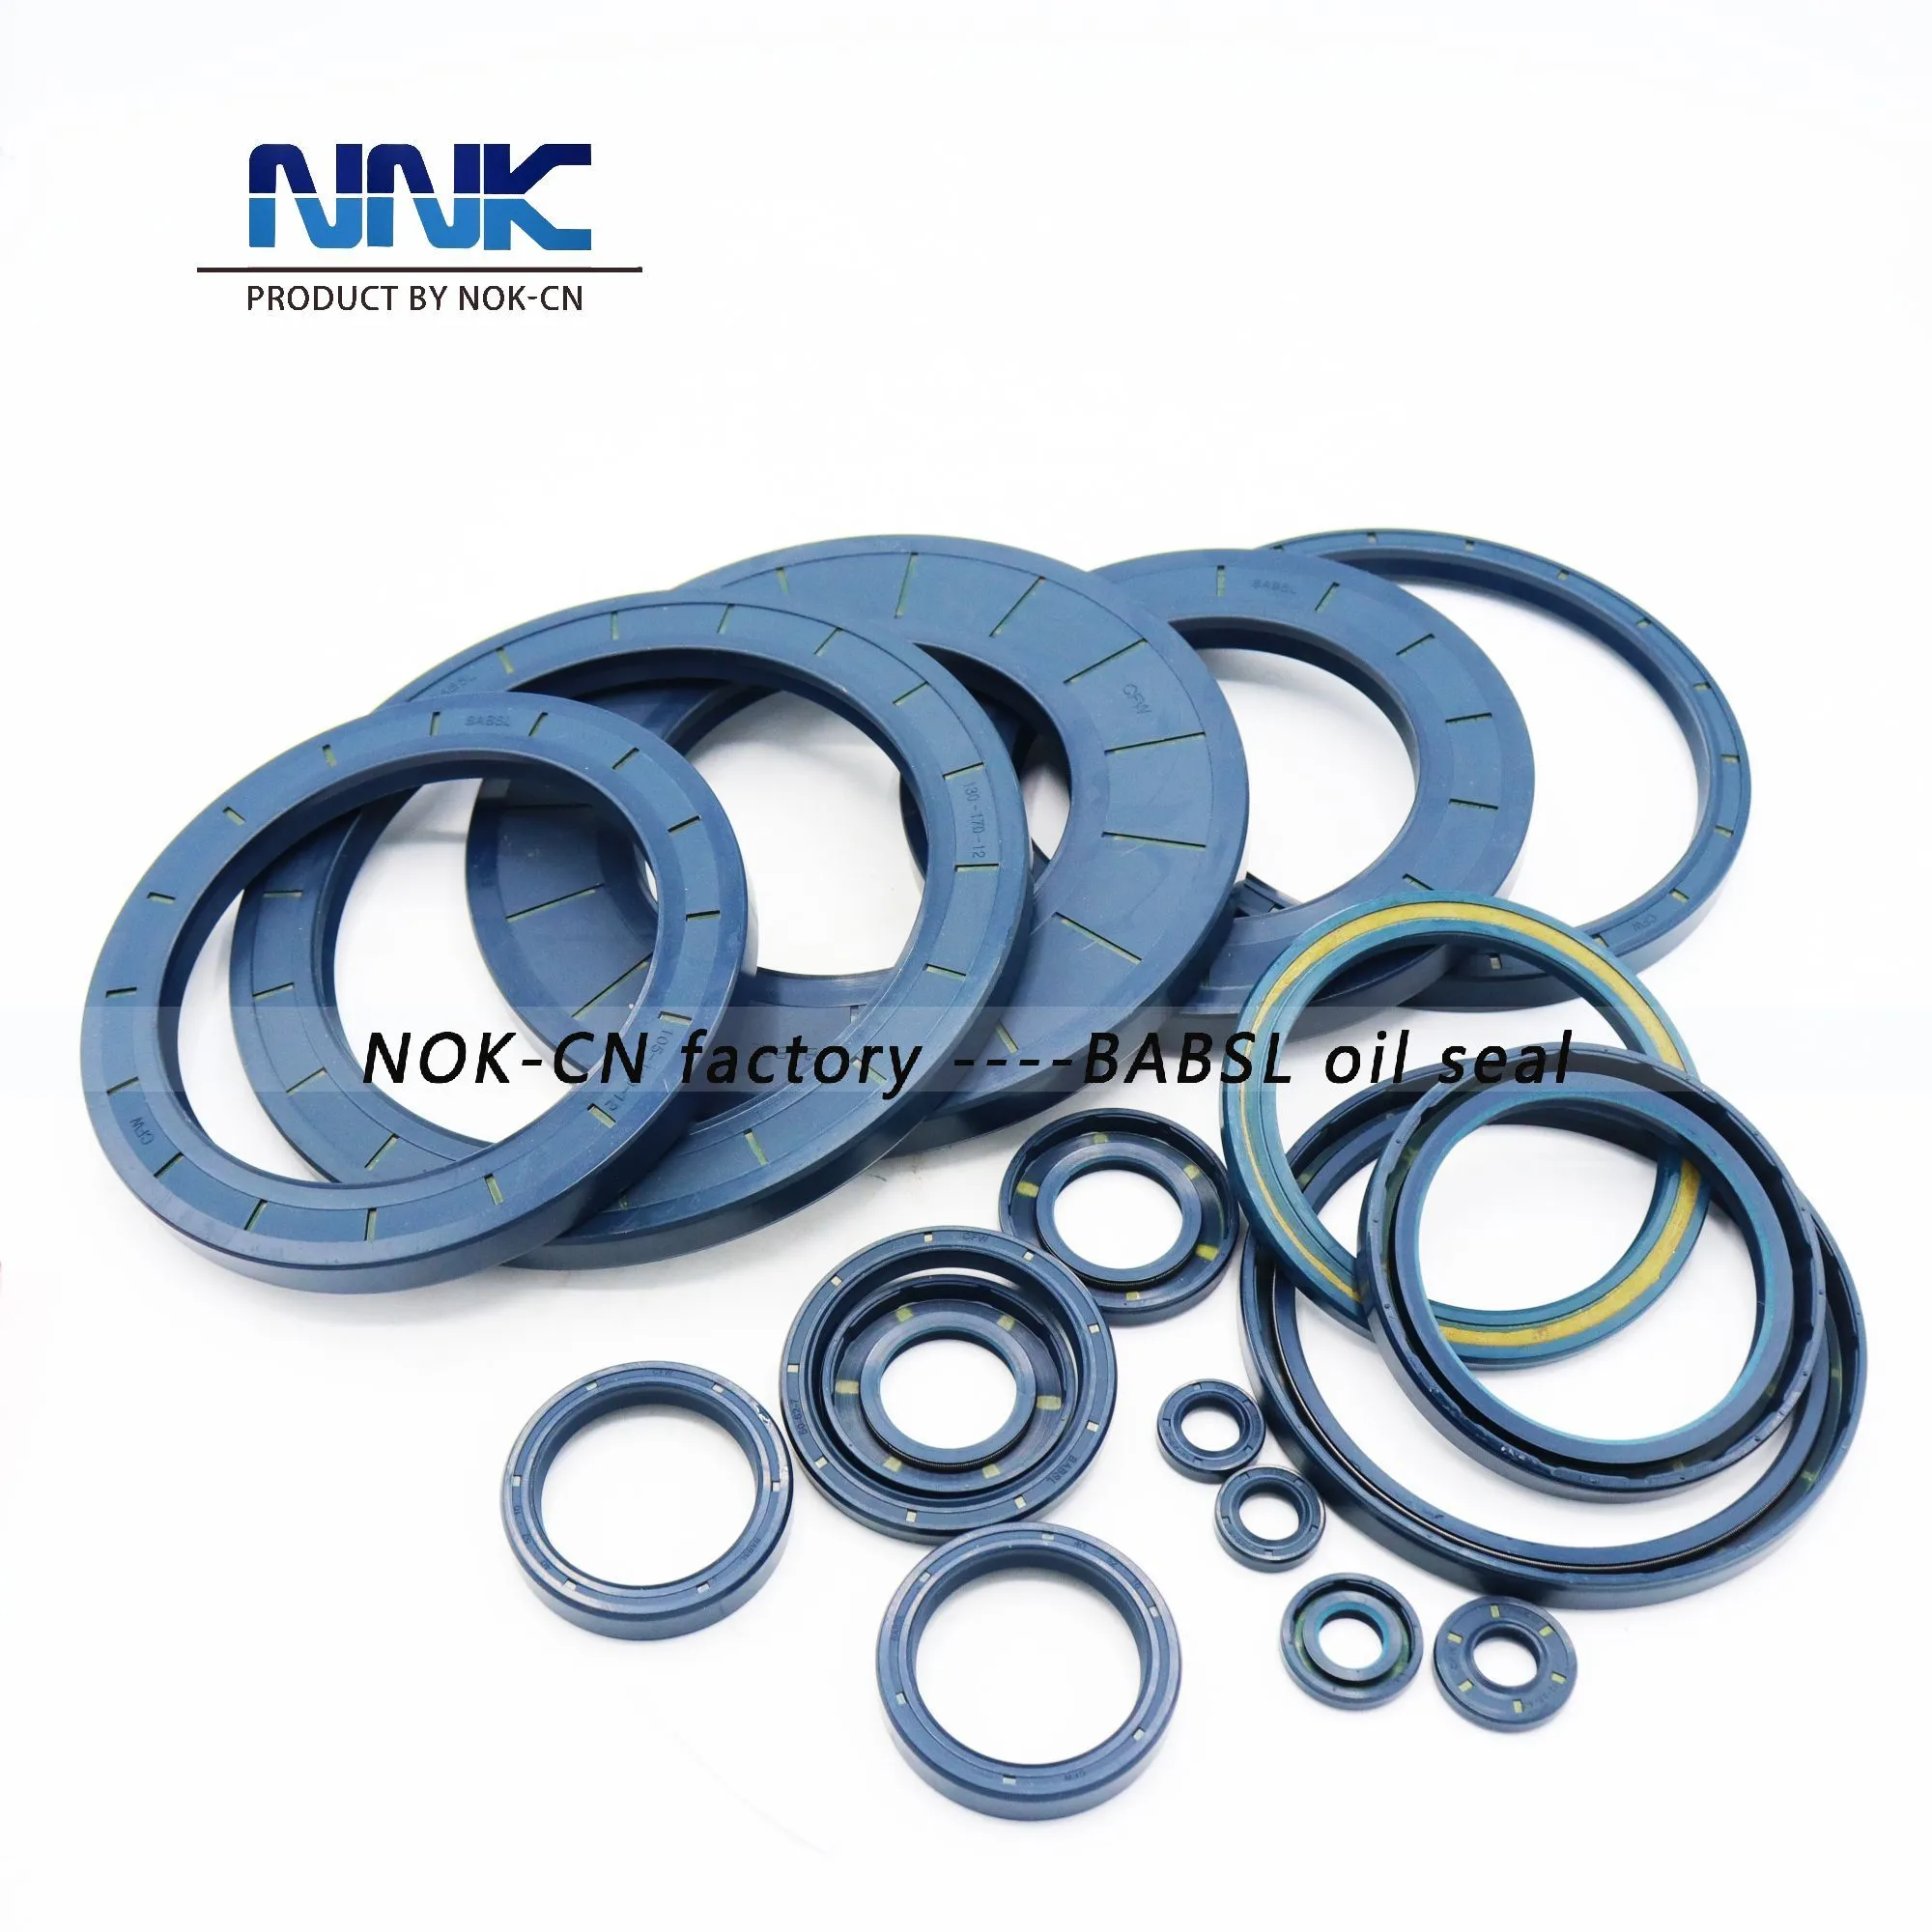 Where can I buy boom oil seals, hydraulic pump oil seals, oil cylinder seals, high quality high pressure oil seals?